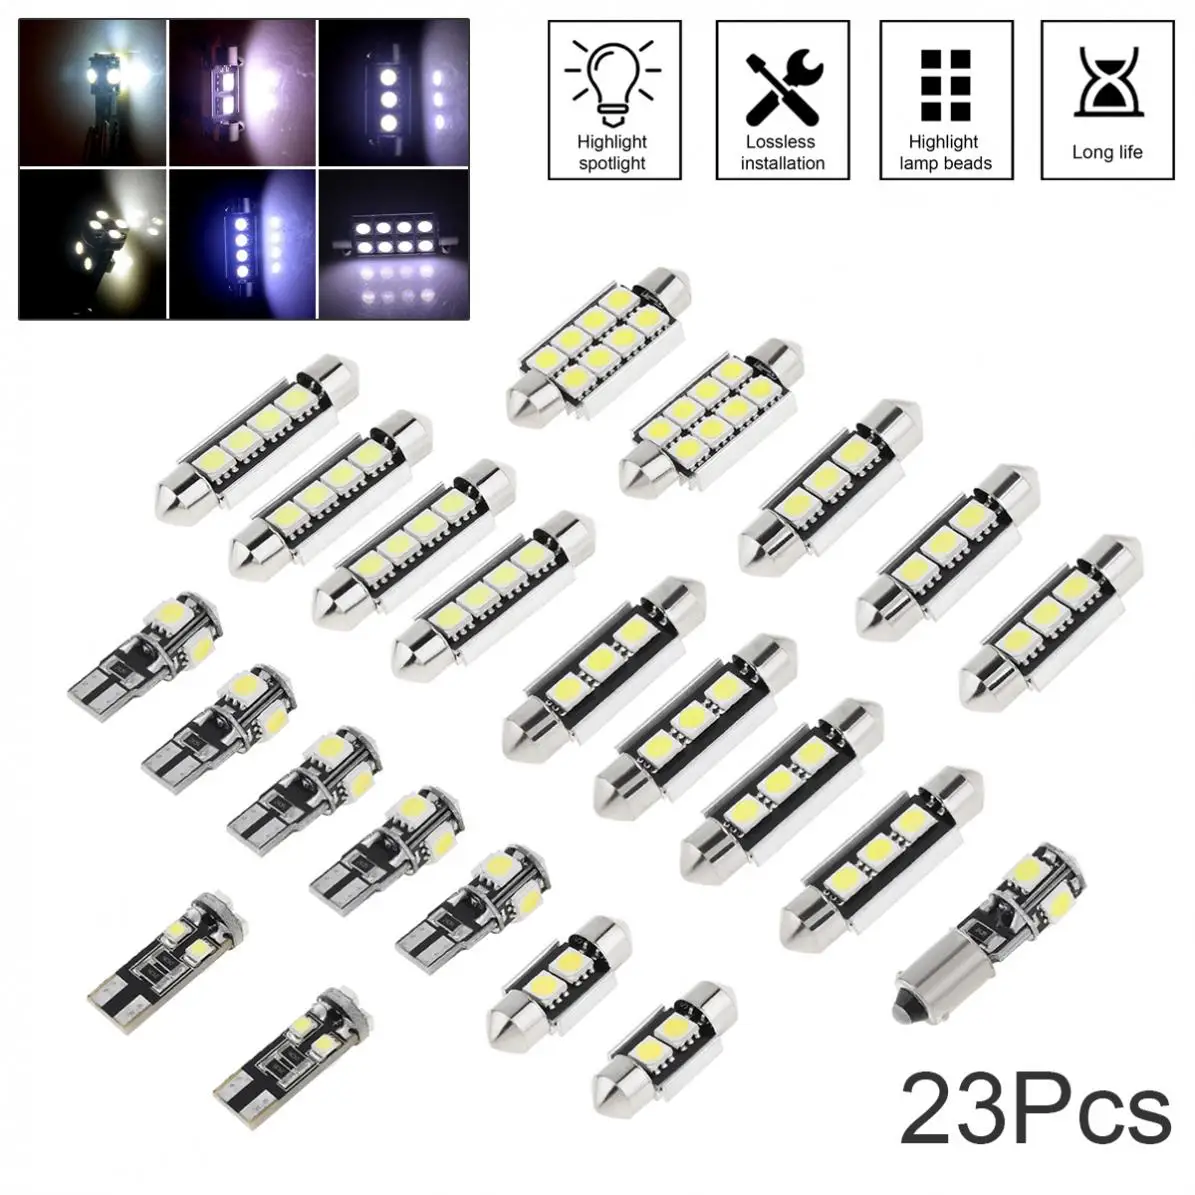 

23pcs T10 5050 W5W Canbus LED White Car Interior Inside Light Dome Trunk Map License Plate Lamp Bulb